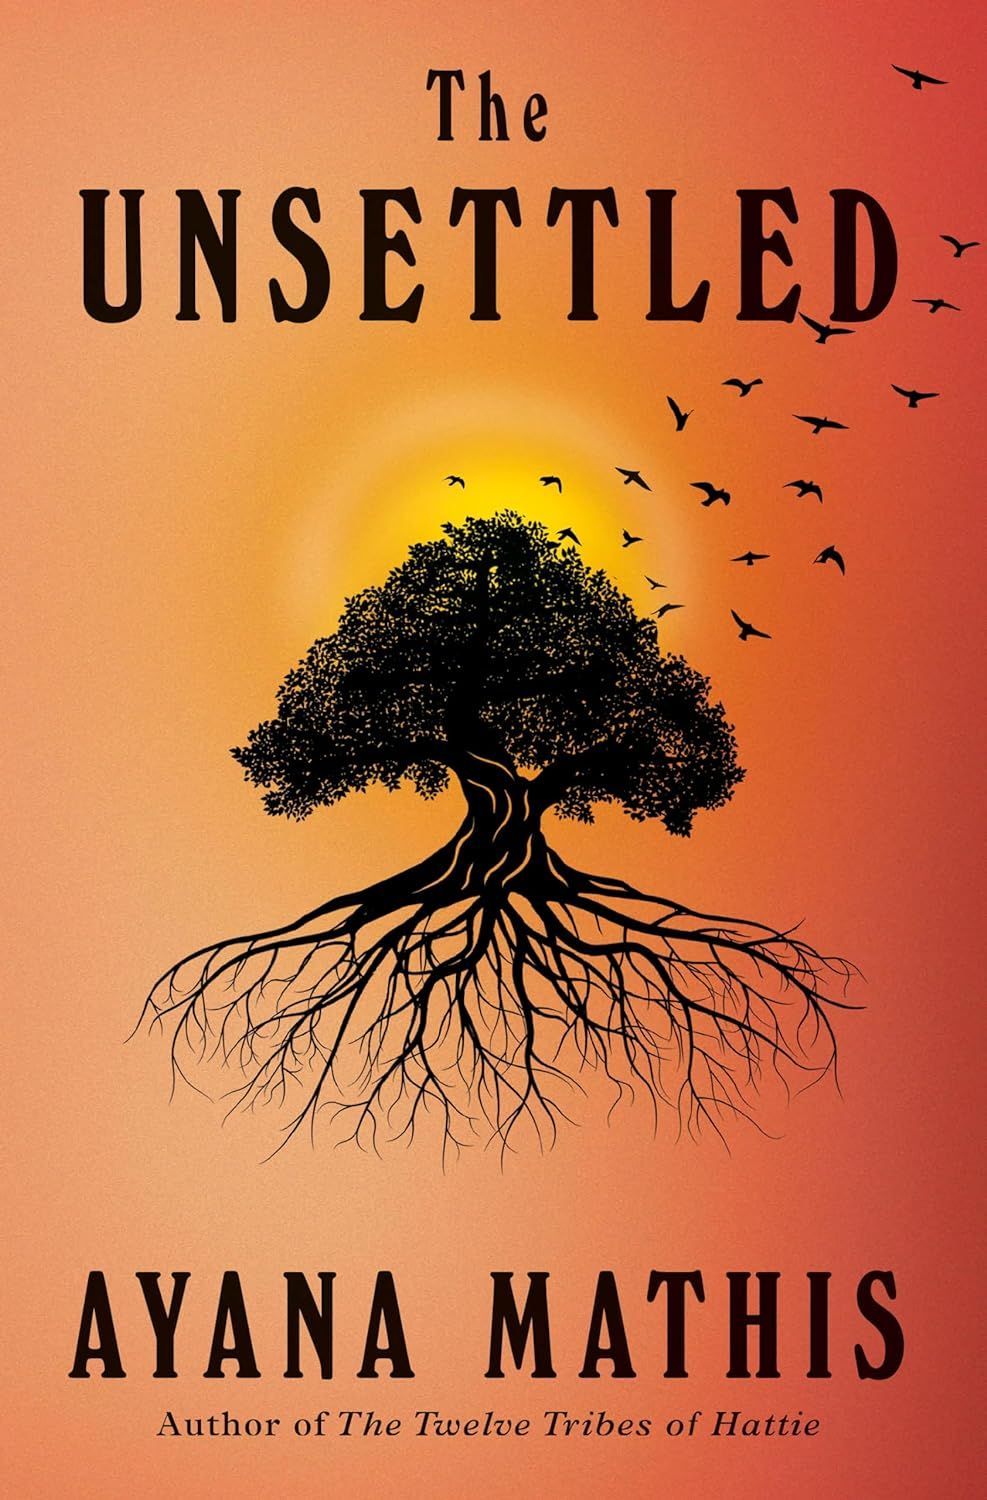 Refuge, Possibility, and Black Place: On Ayana Mathis’s “The Unsettled”